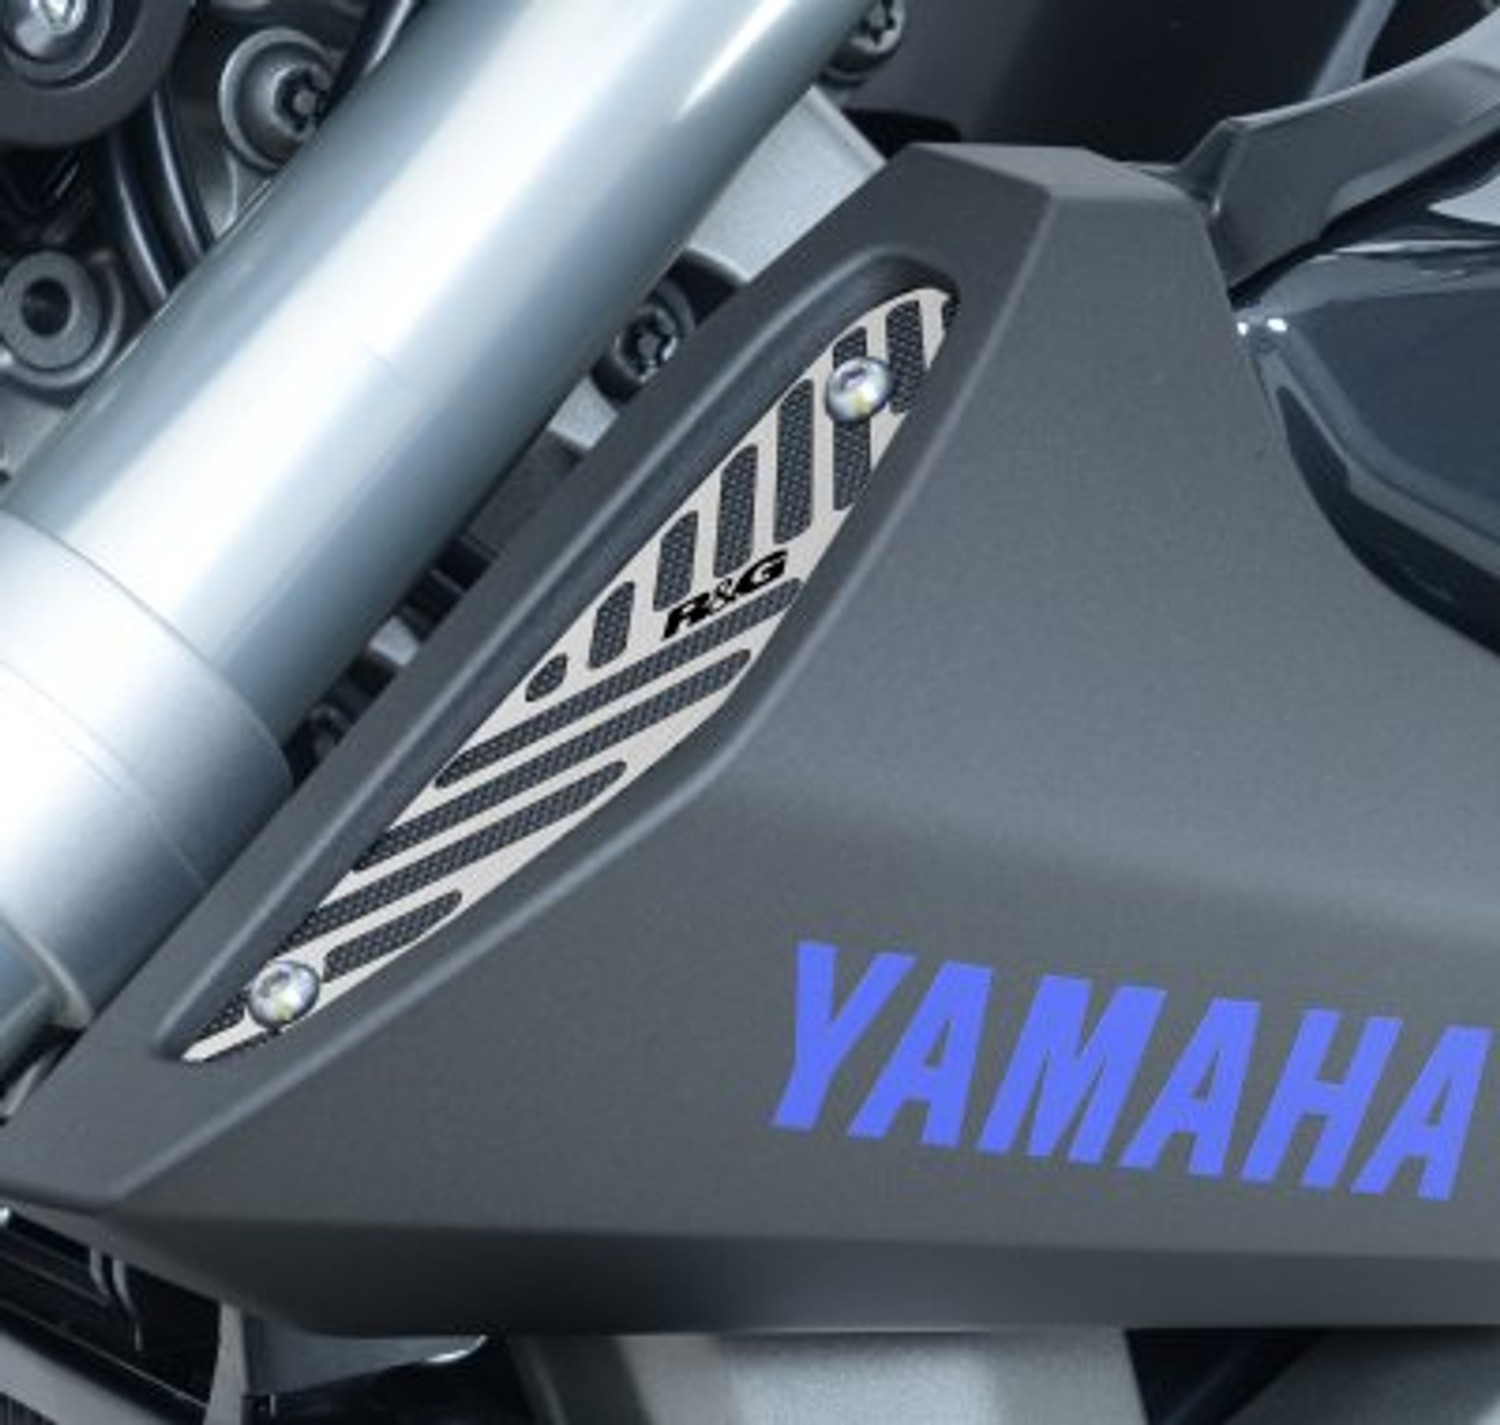 R&G Racing Air Intake Covers compatible with Yamaha MT-09 2013-2016